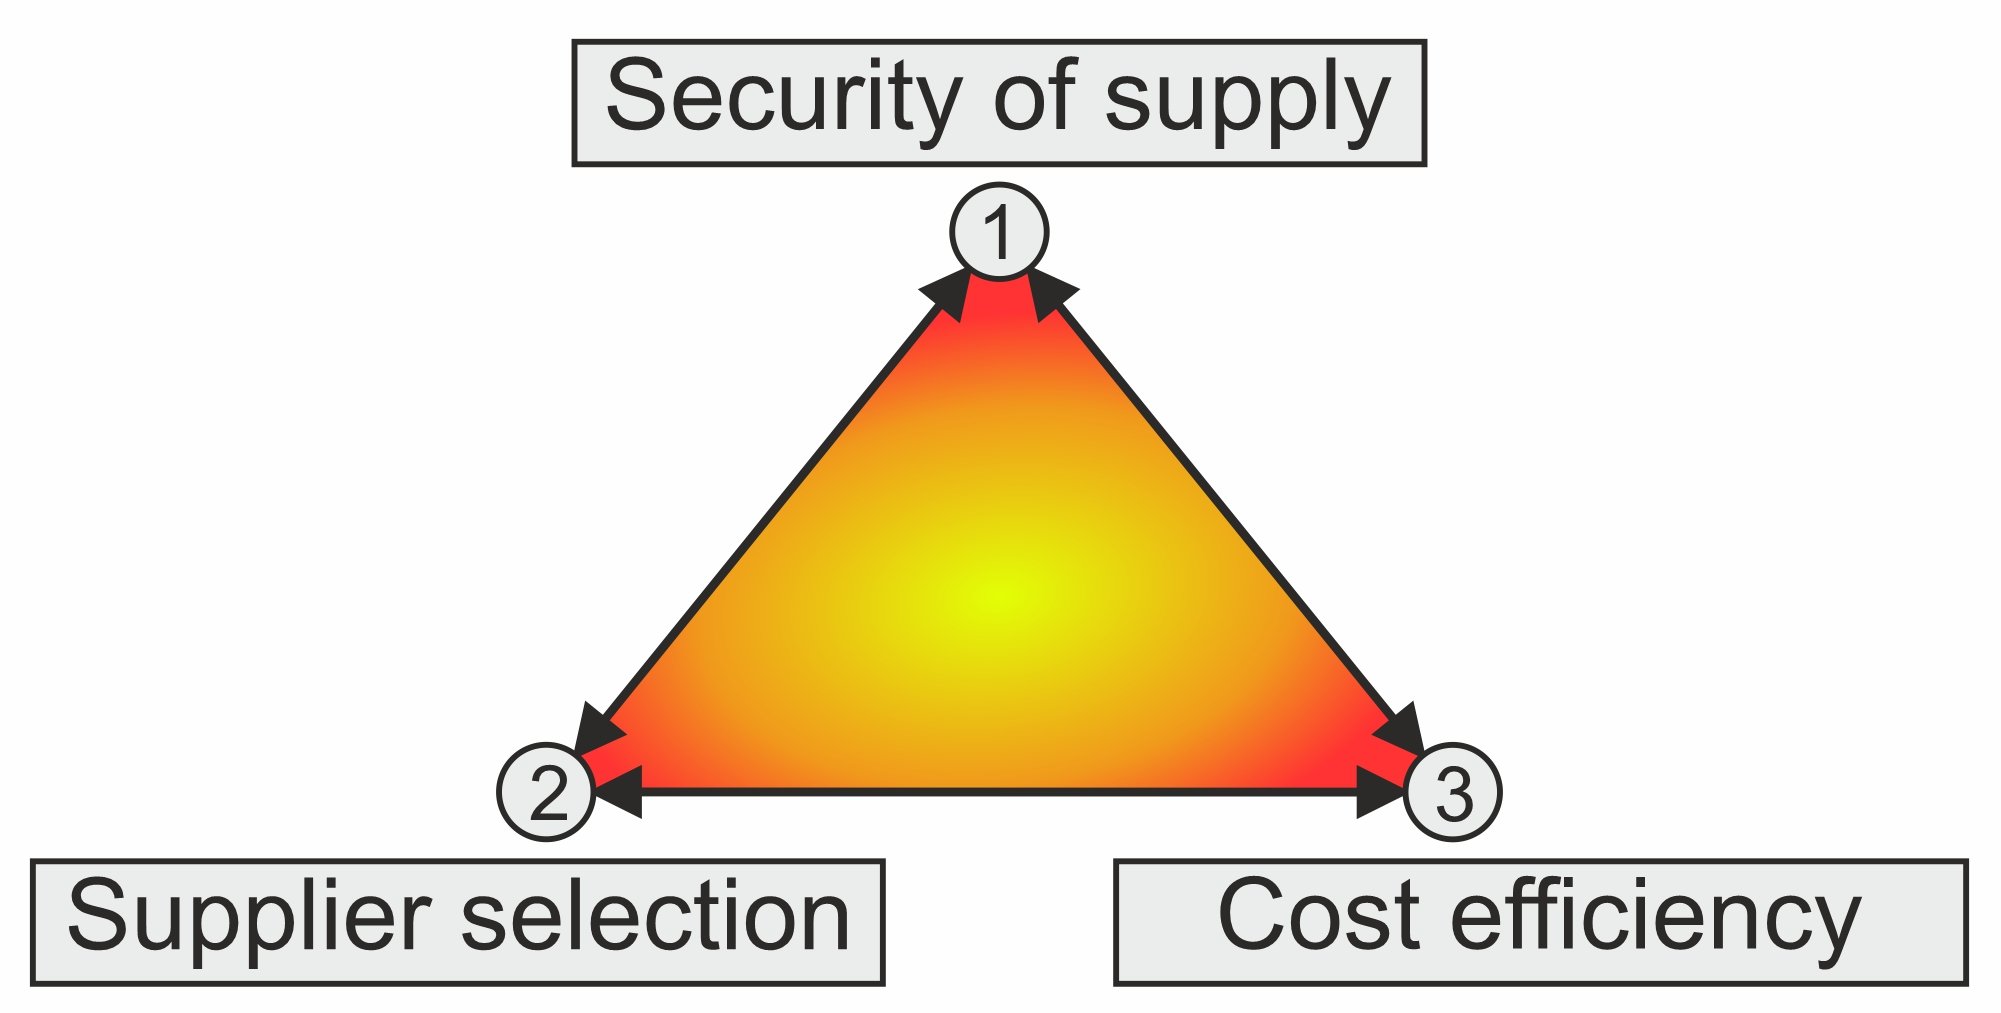 The sourcing triangle